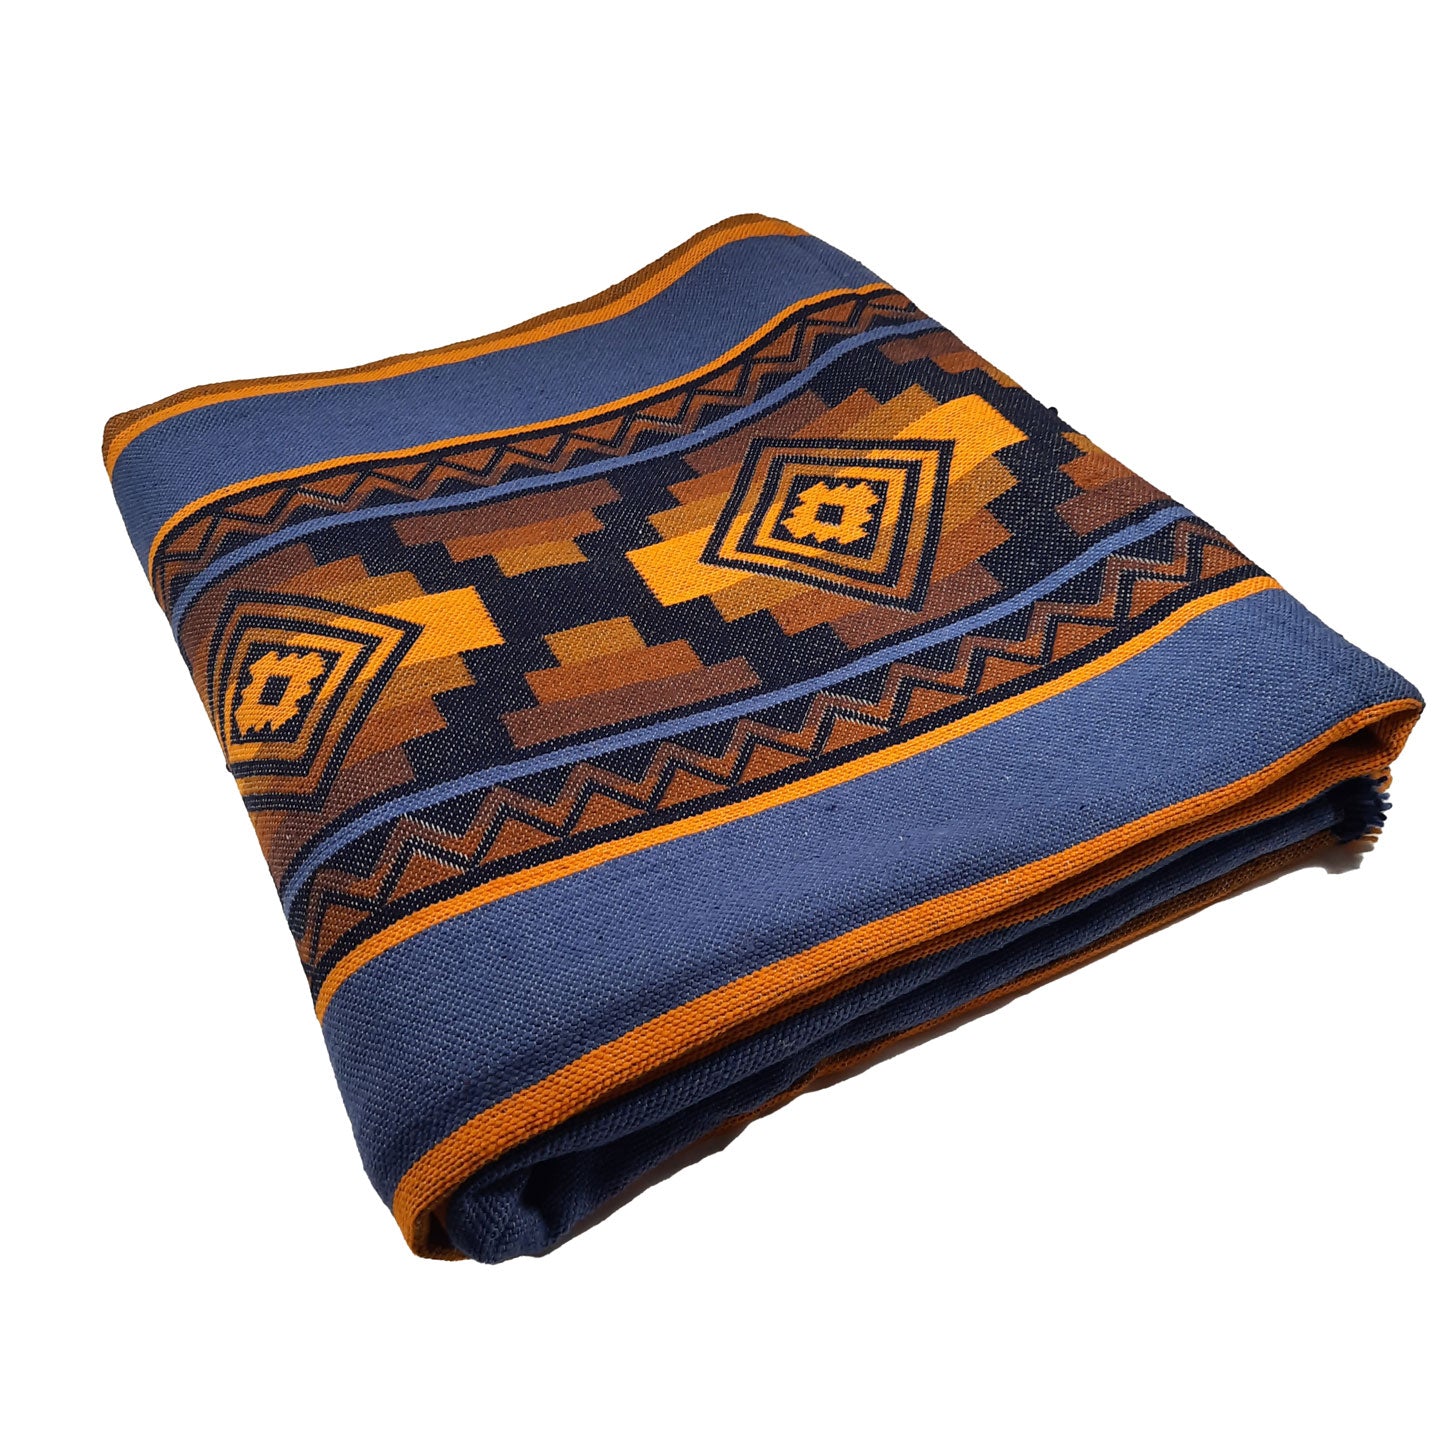 Throw and Cozy Blankets